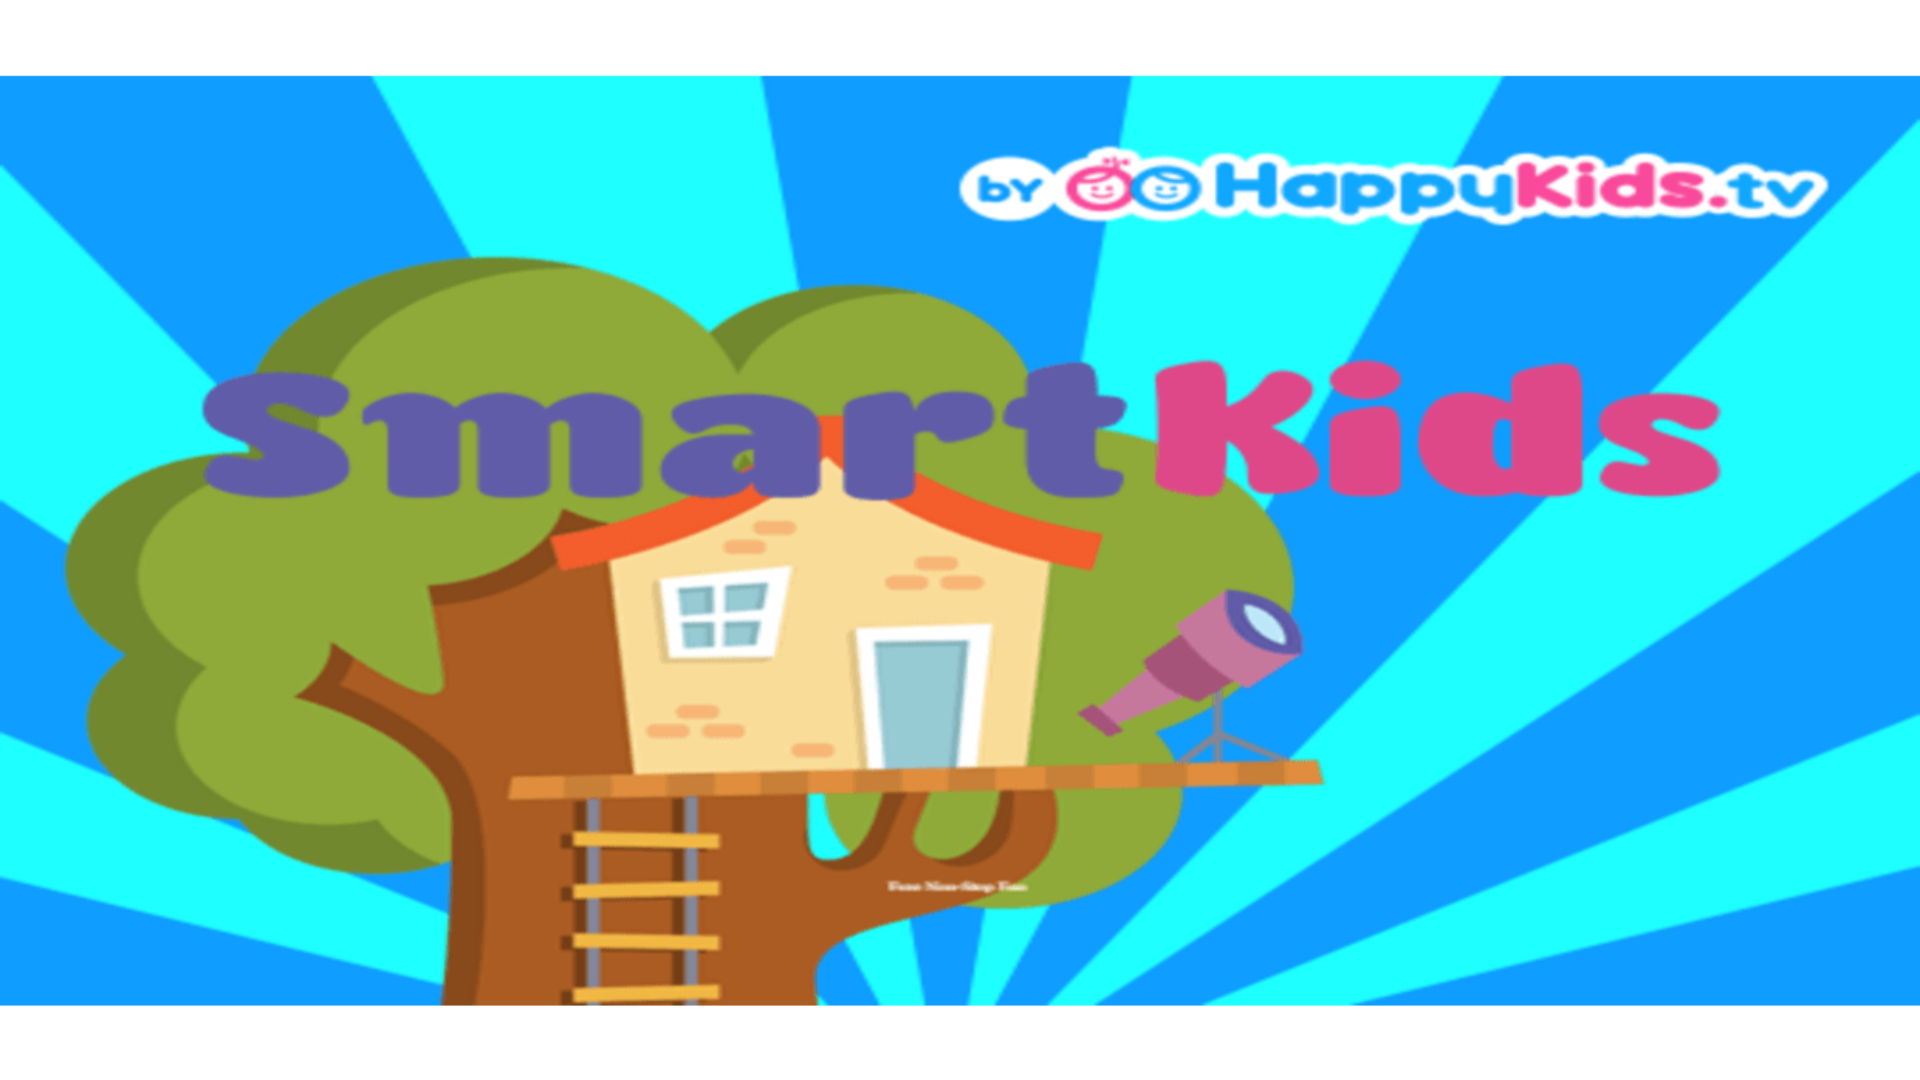 Obtener Smartkids By Happykids Microsoft Store Es Pa - fun with roblox by happykids.tv